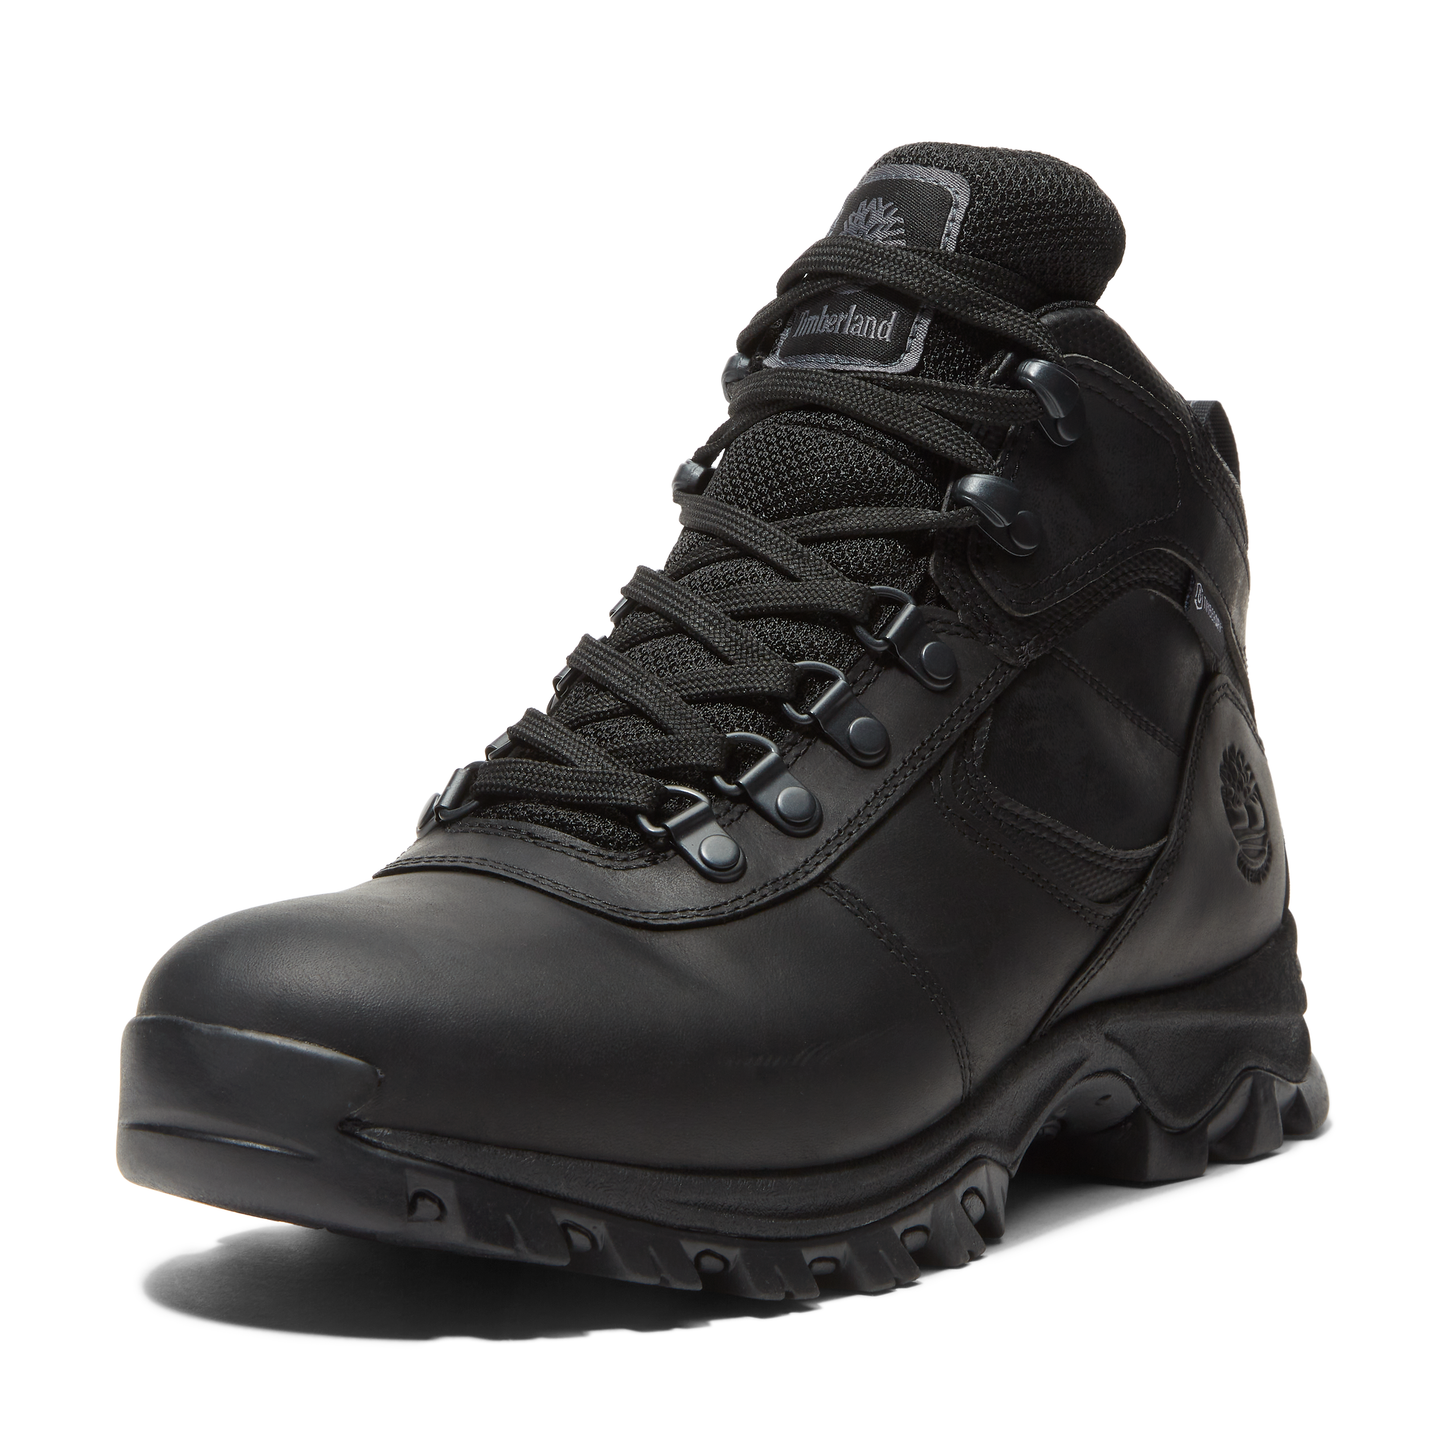 Bota Timberland MT Maddsen Impermeable Negra | Outdoor Adventure Colom…